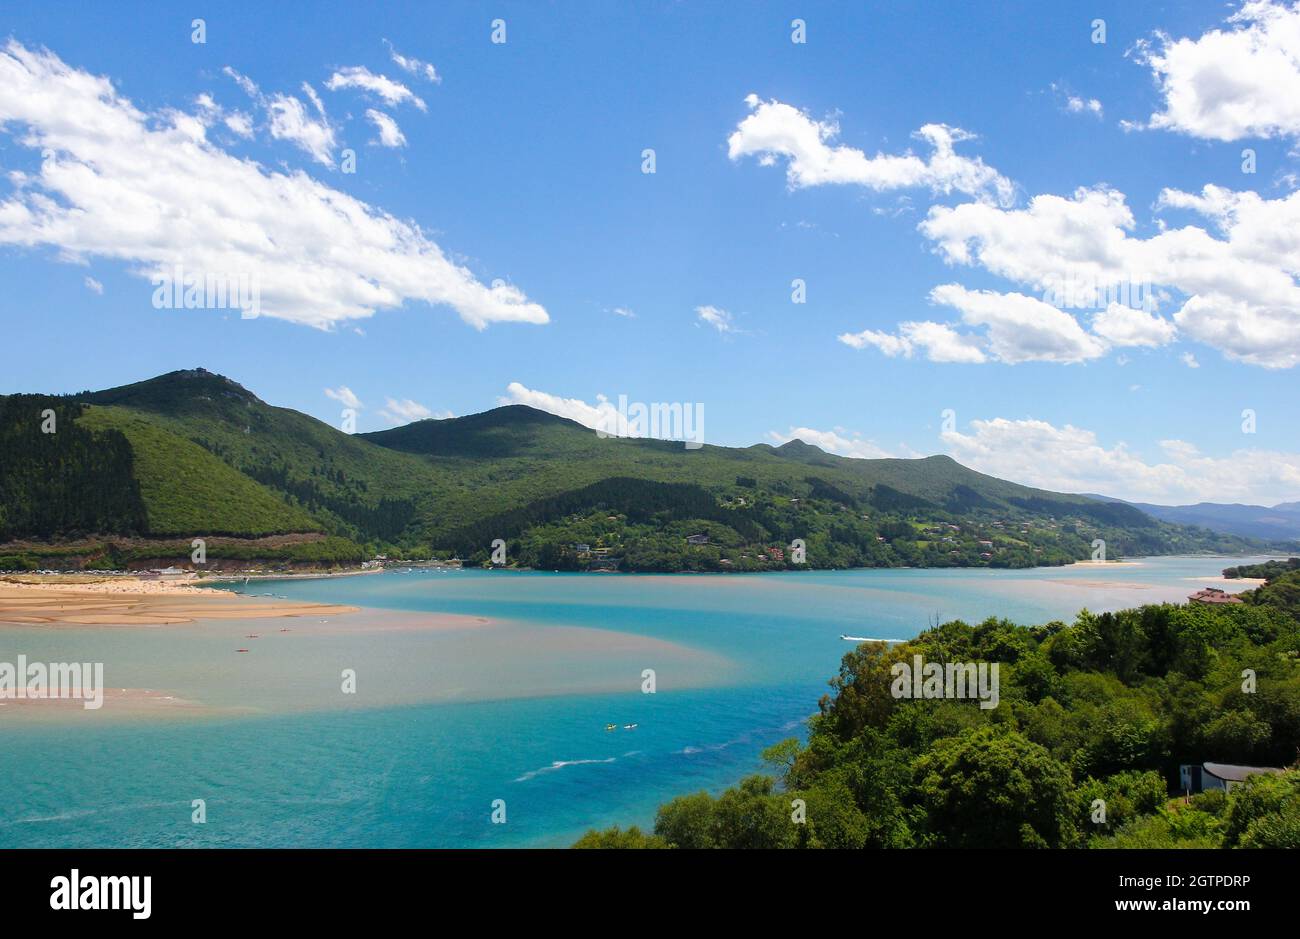 Splendid views of Urdaibai biosphere reserve with mountains, blue sky and white clouds in the Basque Country. Fabulous natural landscape Stock Photo